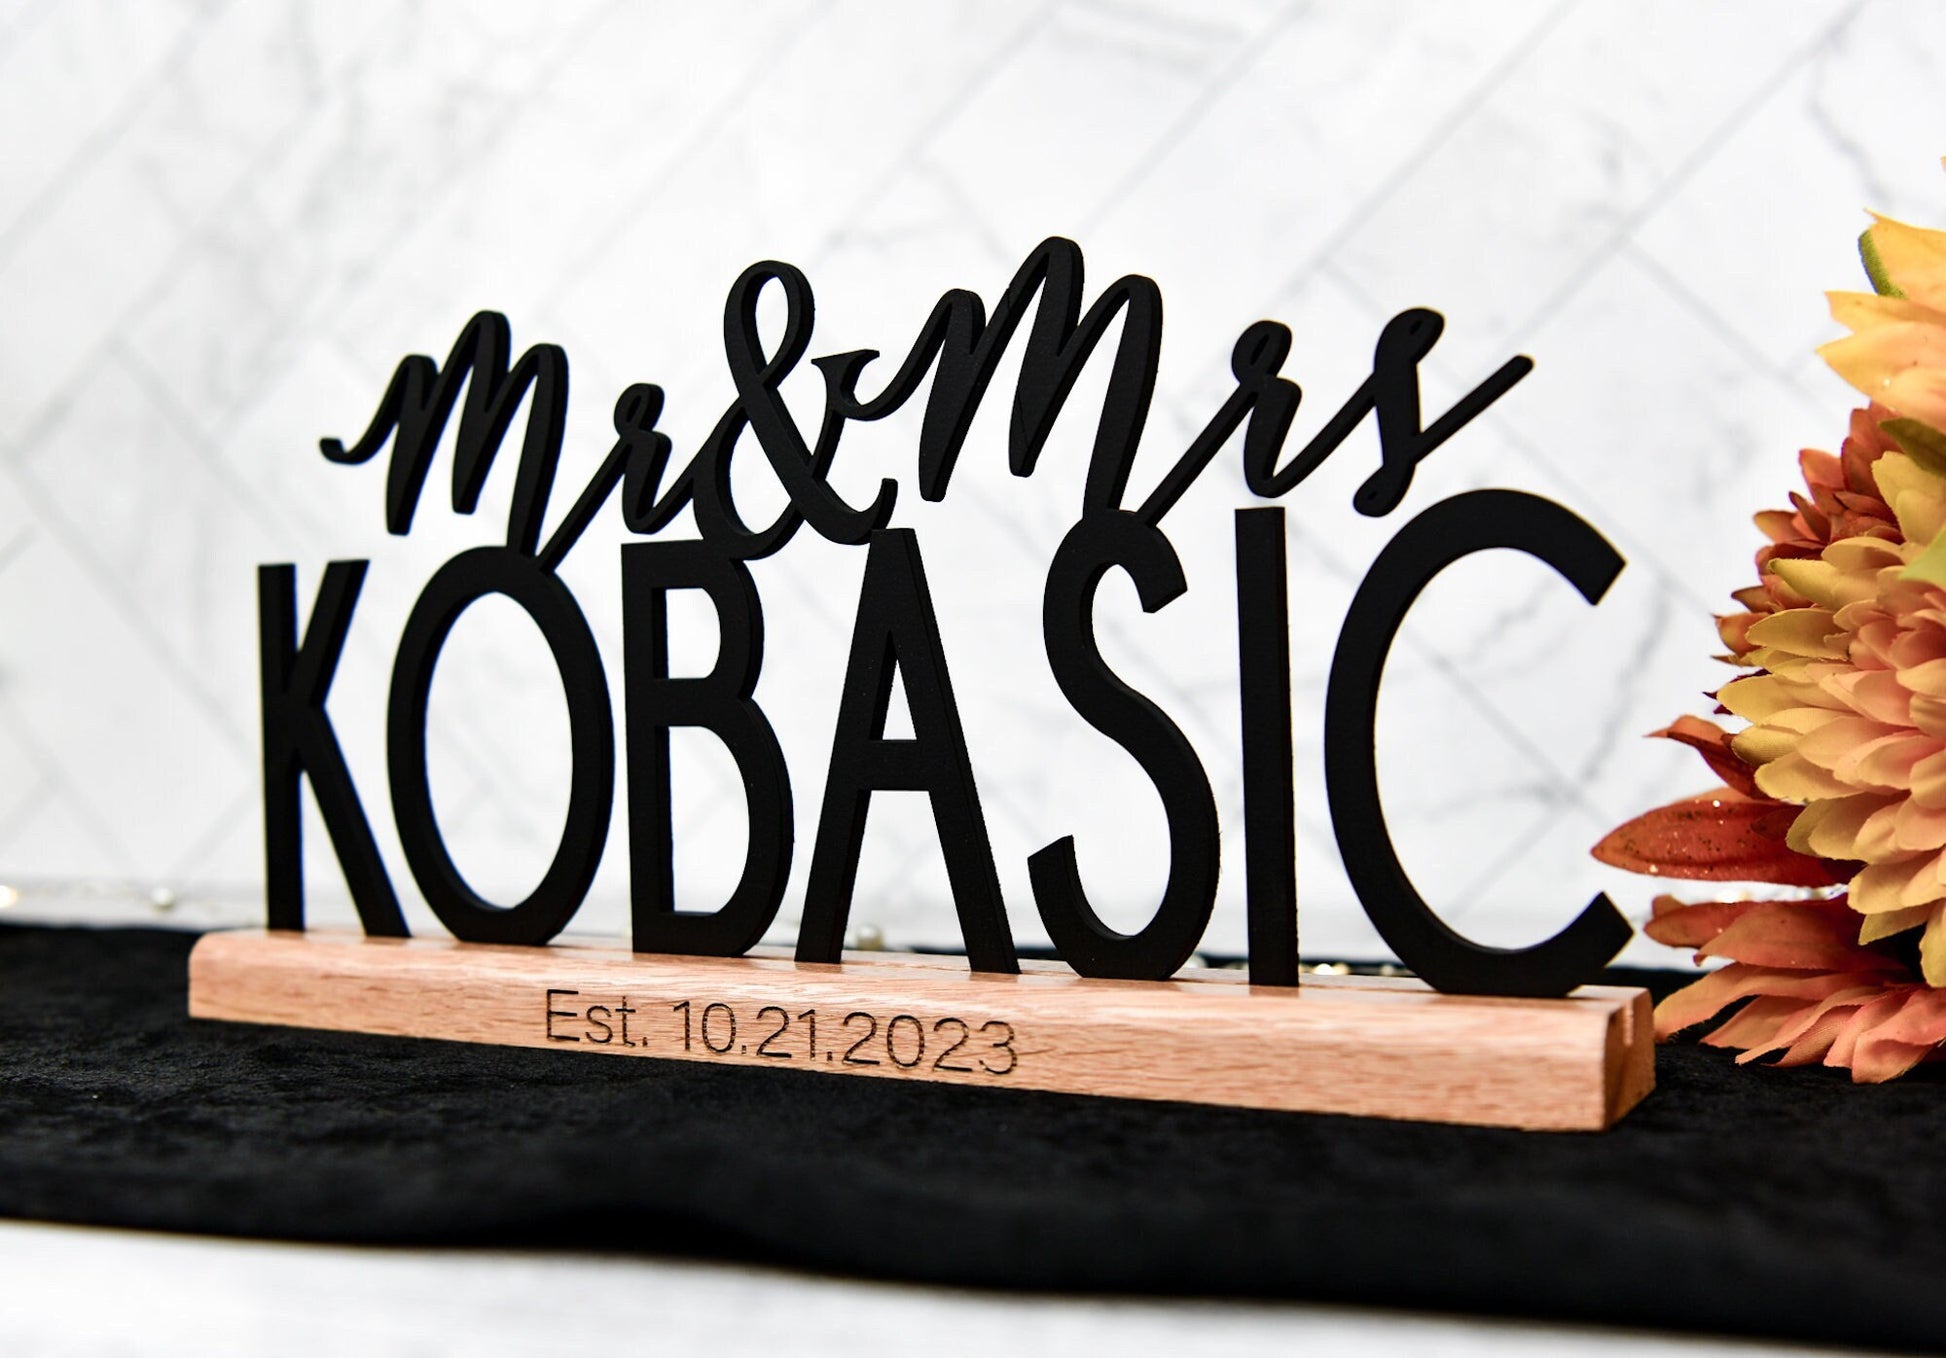 custom wedding sign table decor personalized with mr and mrs plus family last name, date engraved on oak wood base that holds the name sign upright for stand alone ability.